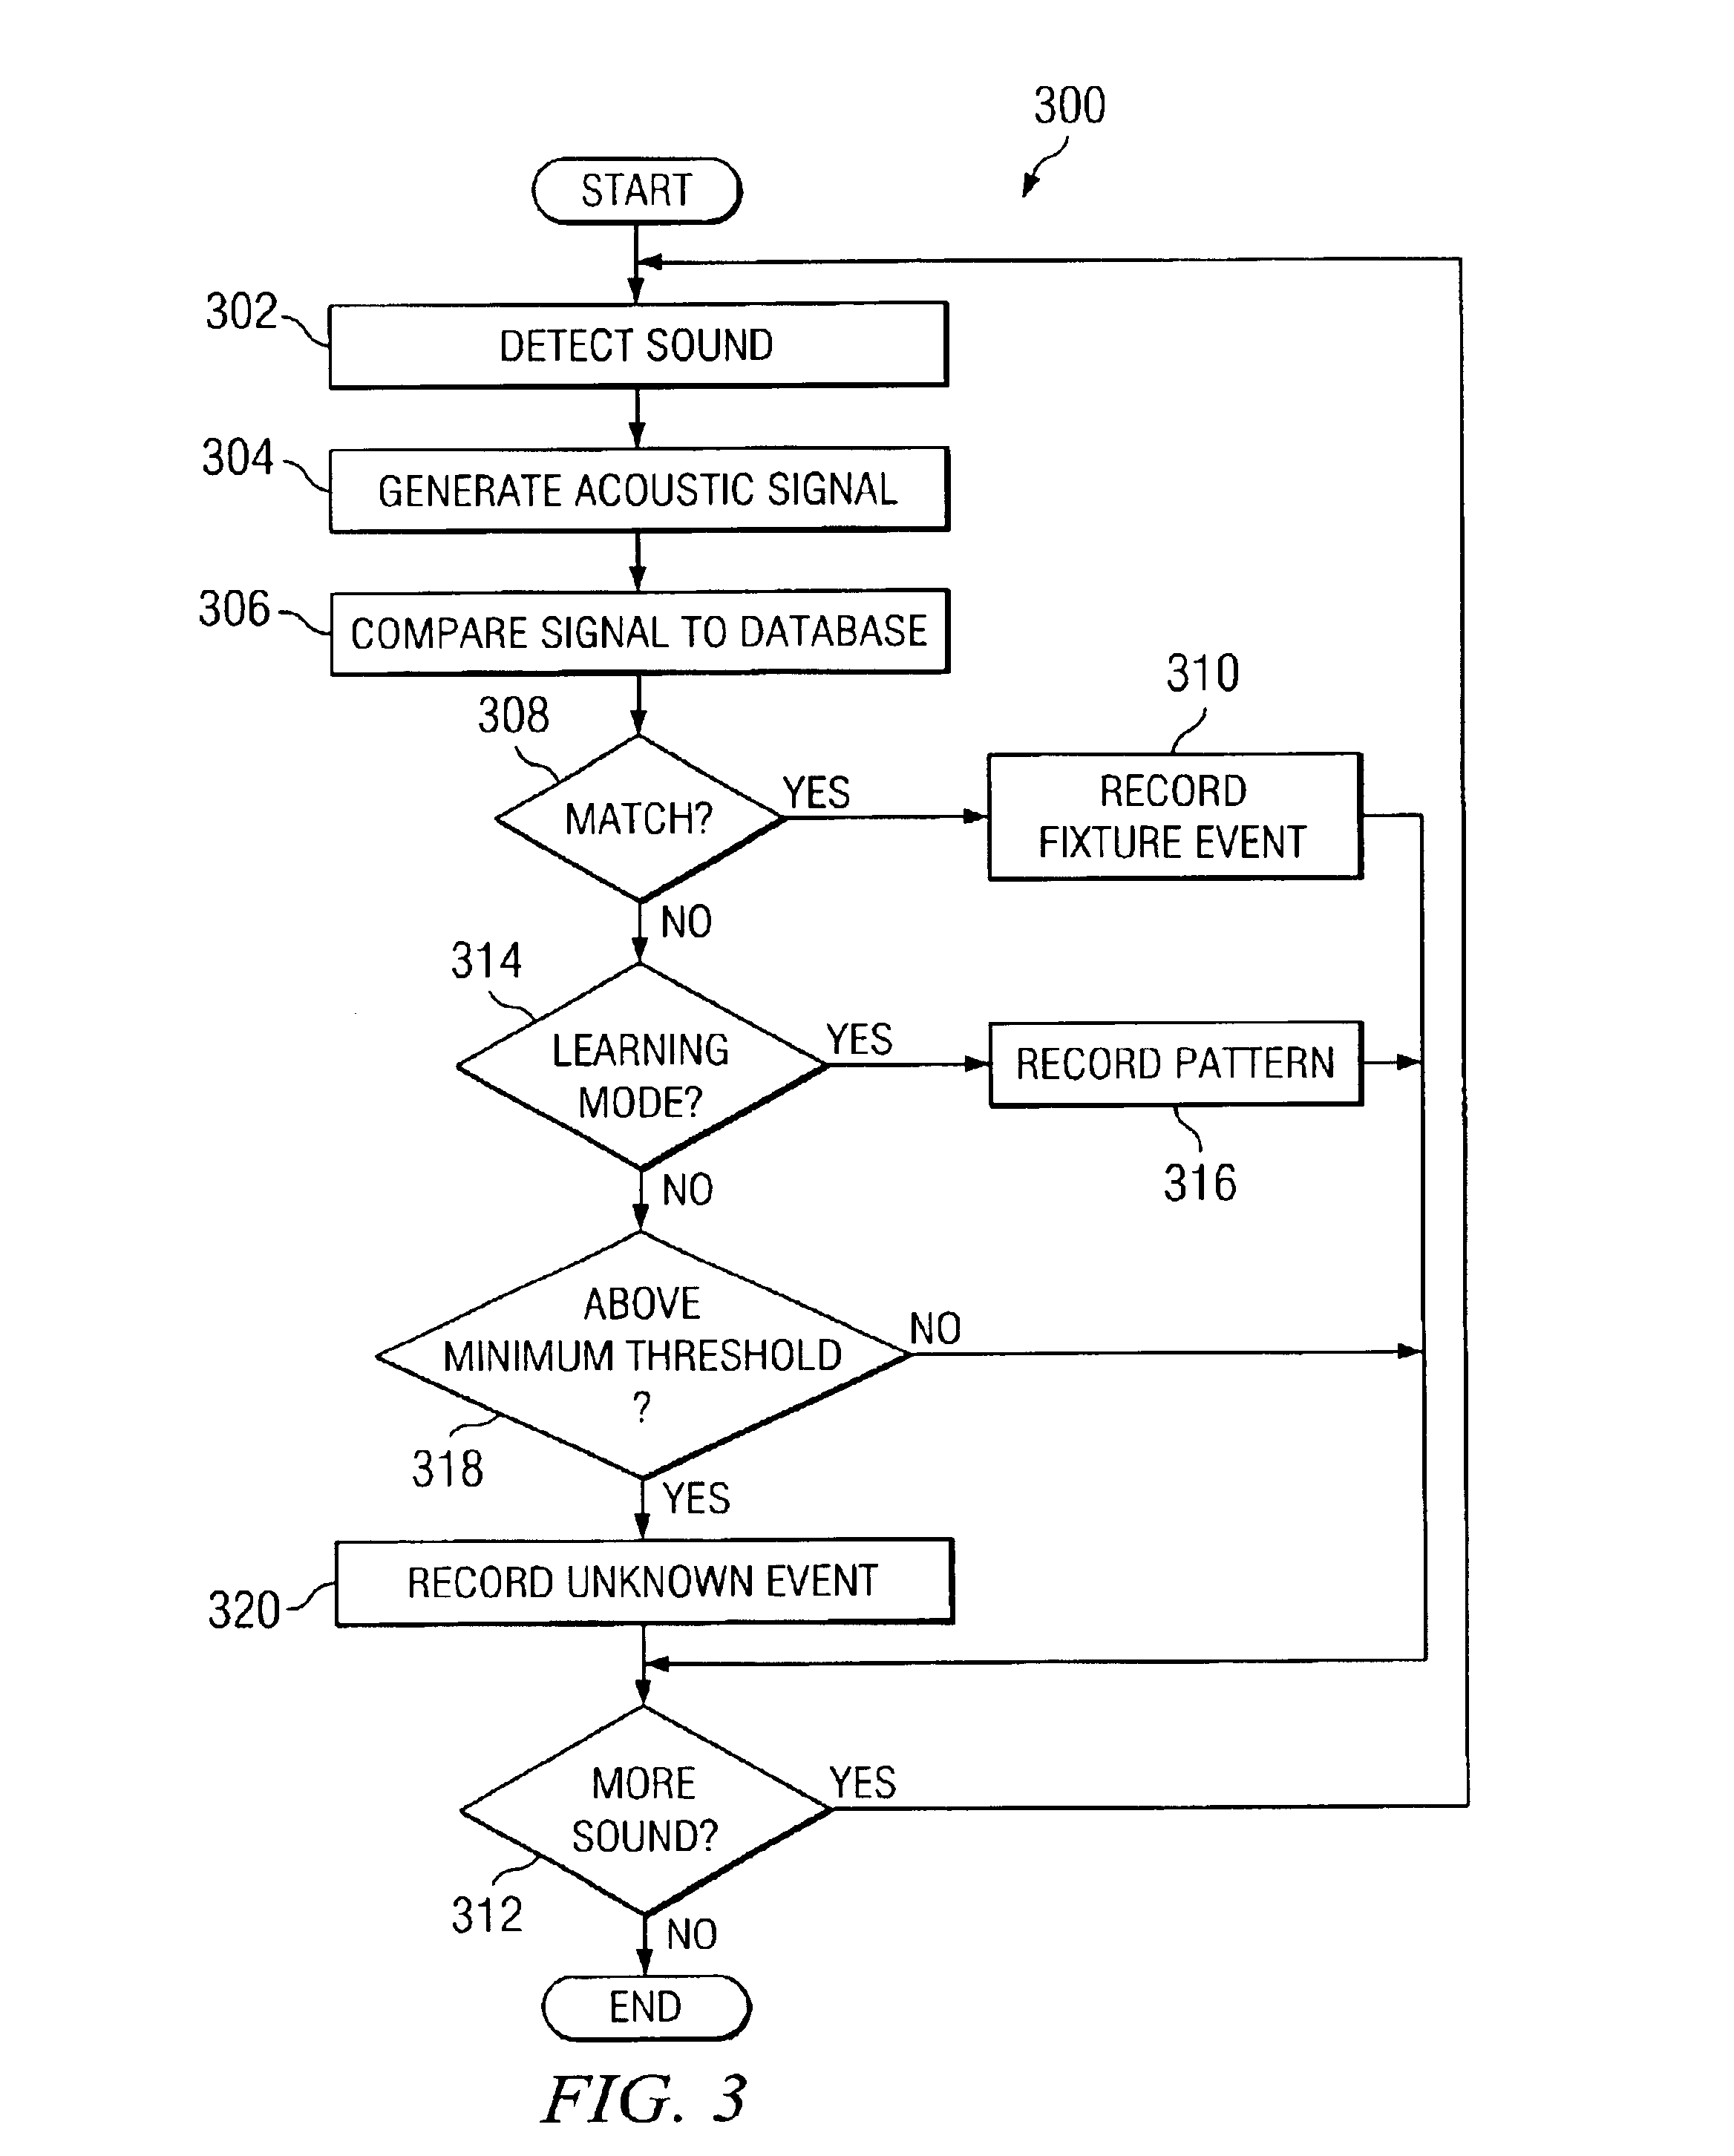 Plumbing supply monitoring, modeling and sizing system and method